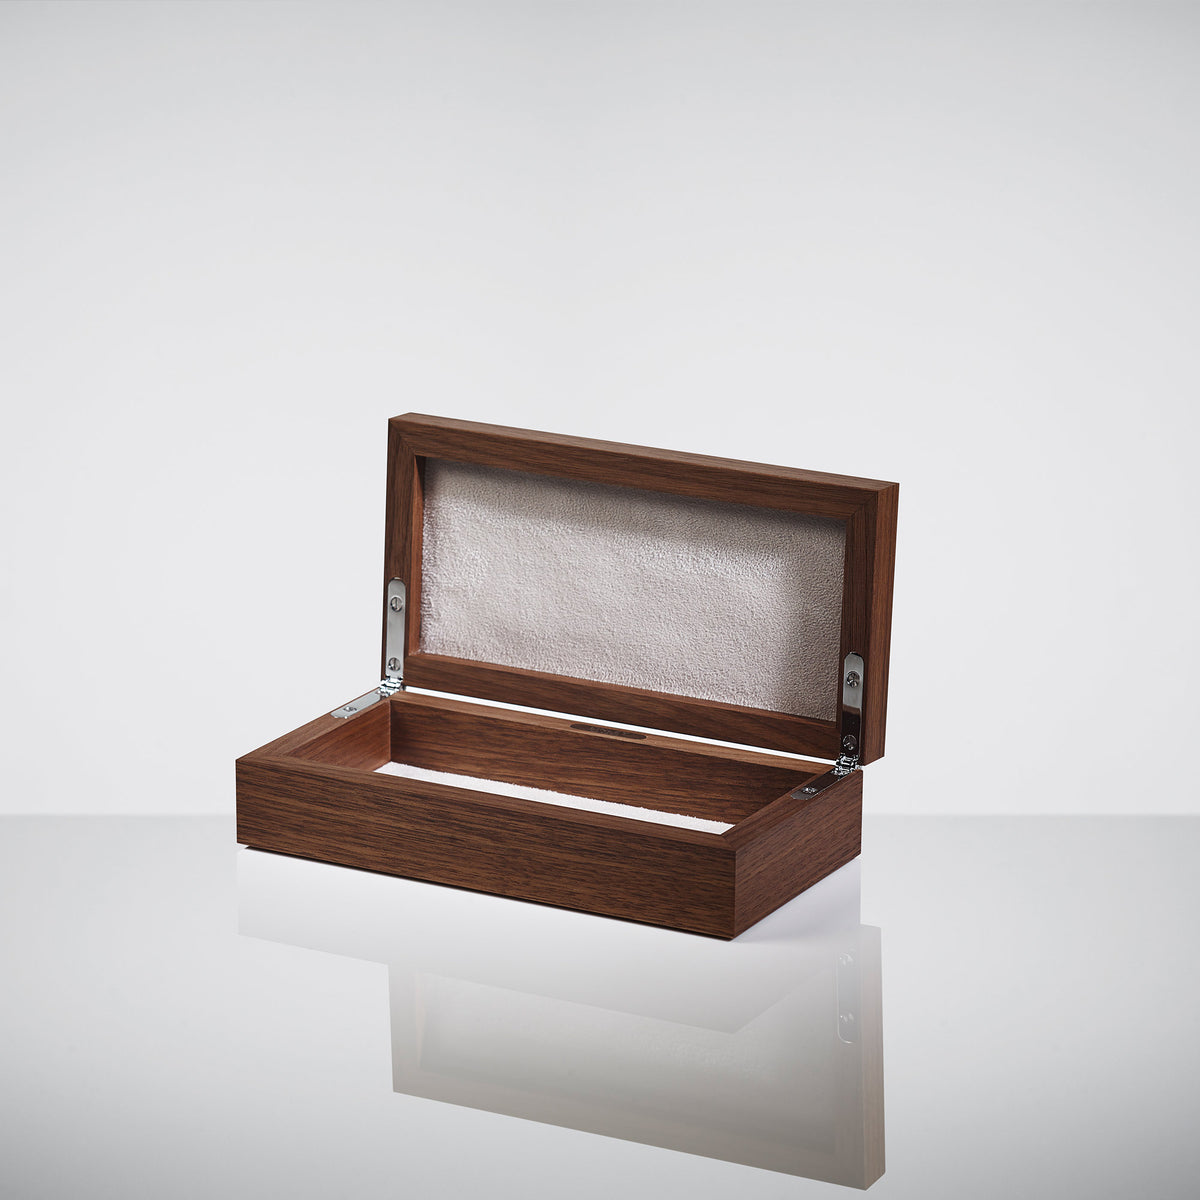 Union Jack Cufflink Box | Luxury Home Accessories & Gifts | LINLEY